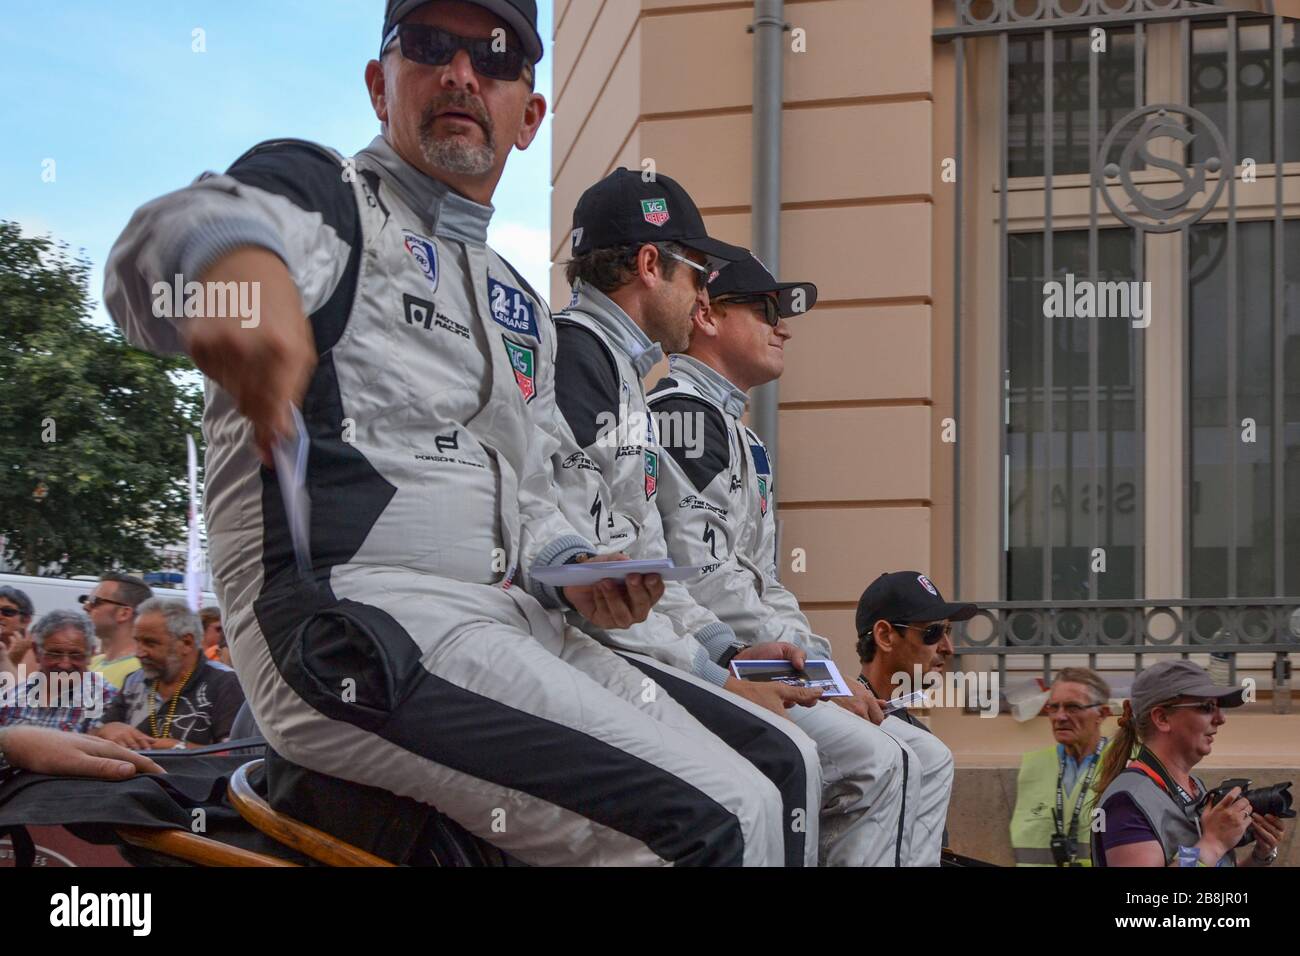 LE MANS, FRANCE - JUNE 13, 2014: Patrick Dempsey and his team on a parade of pilots racing in Le Mans, France. Stock Photo